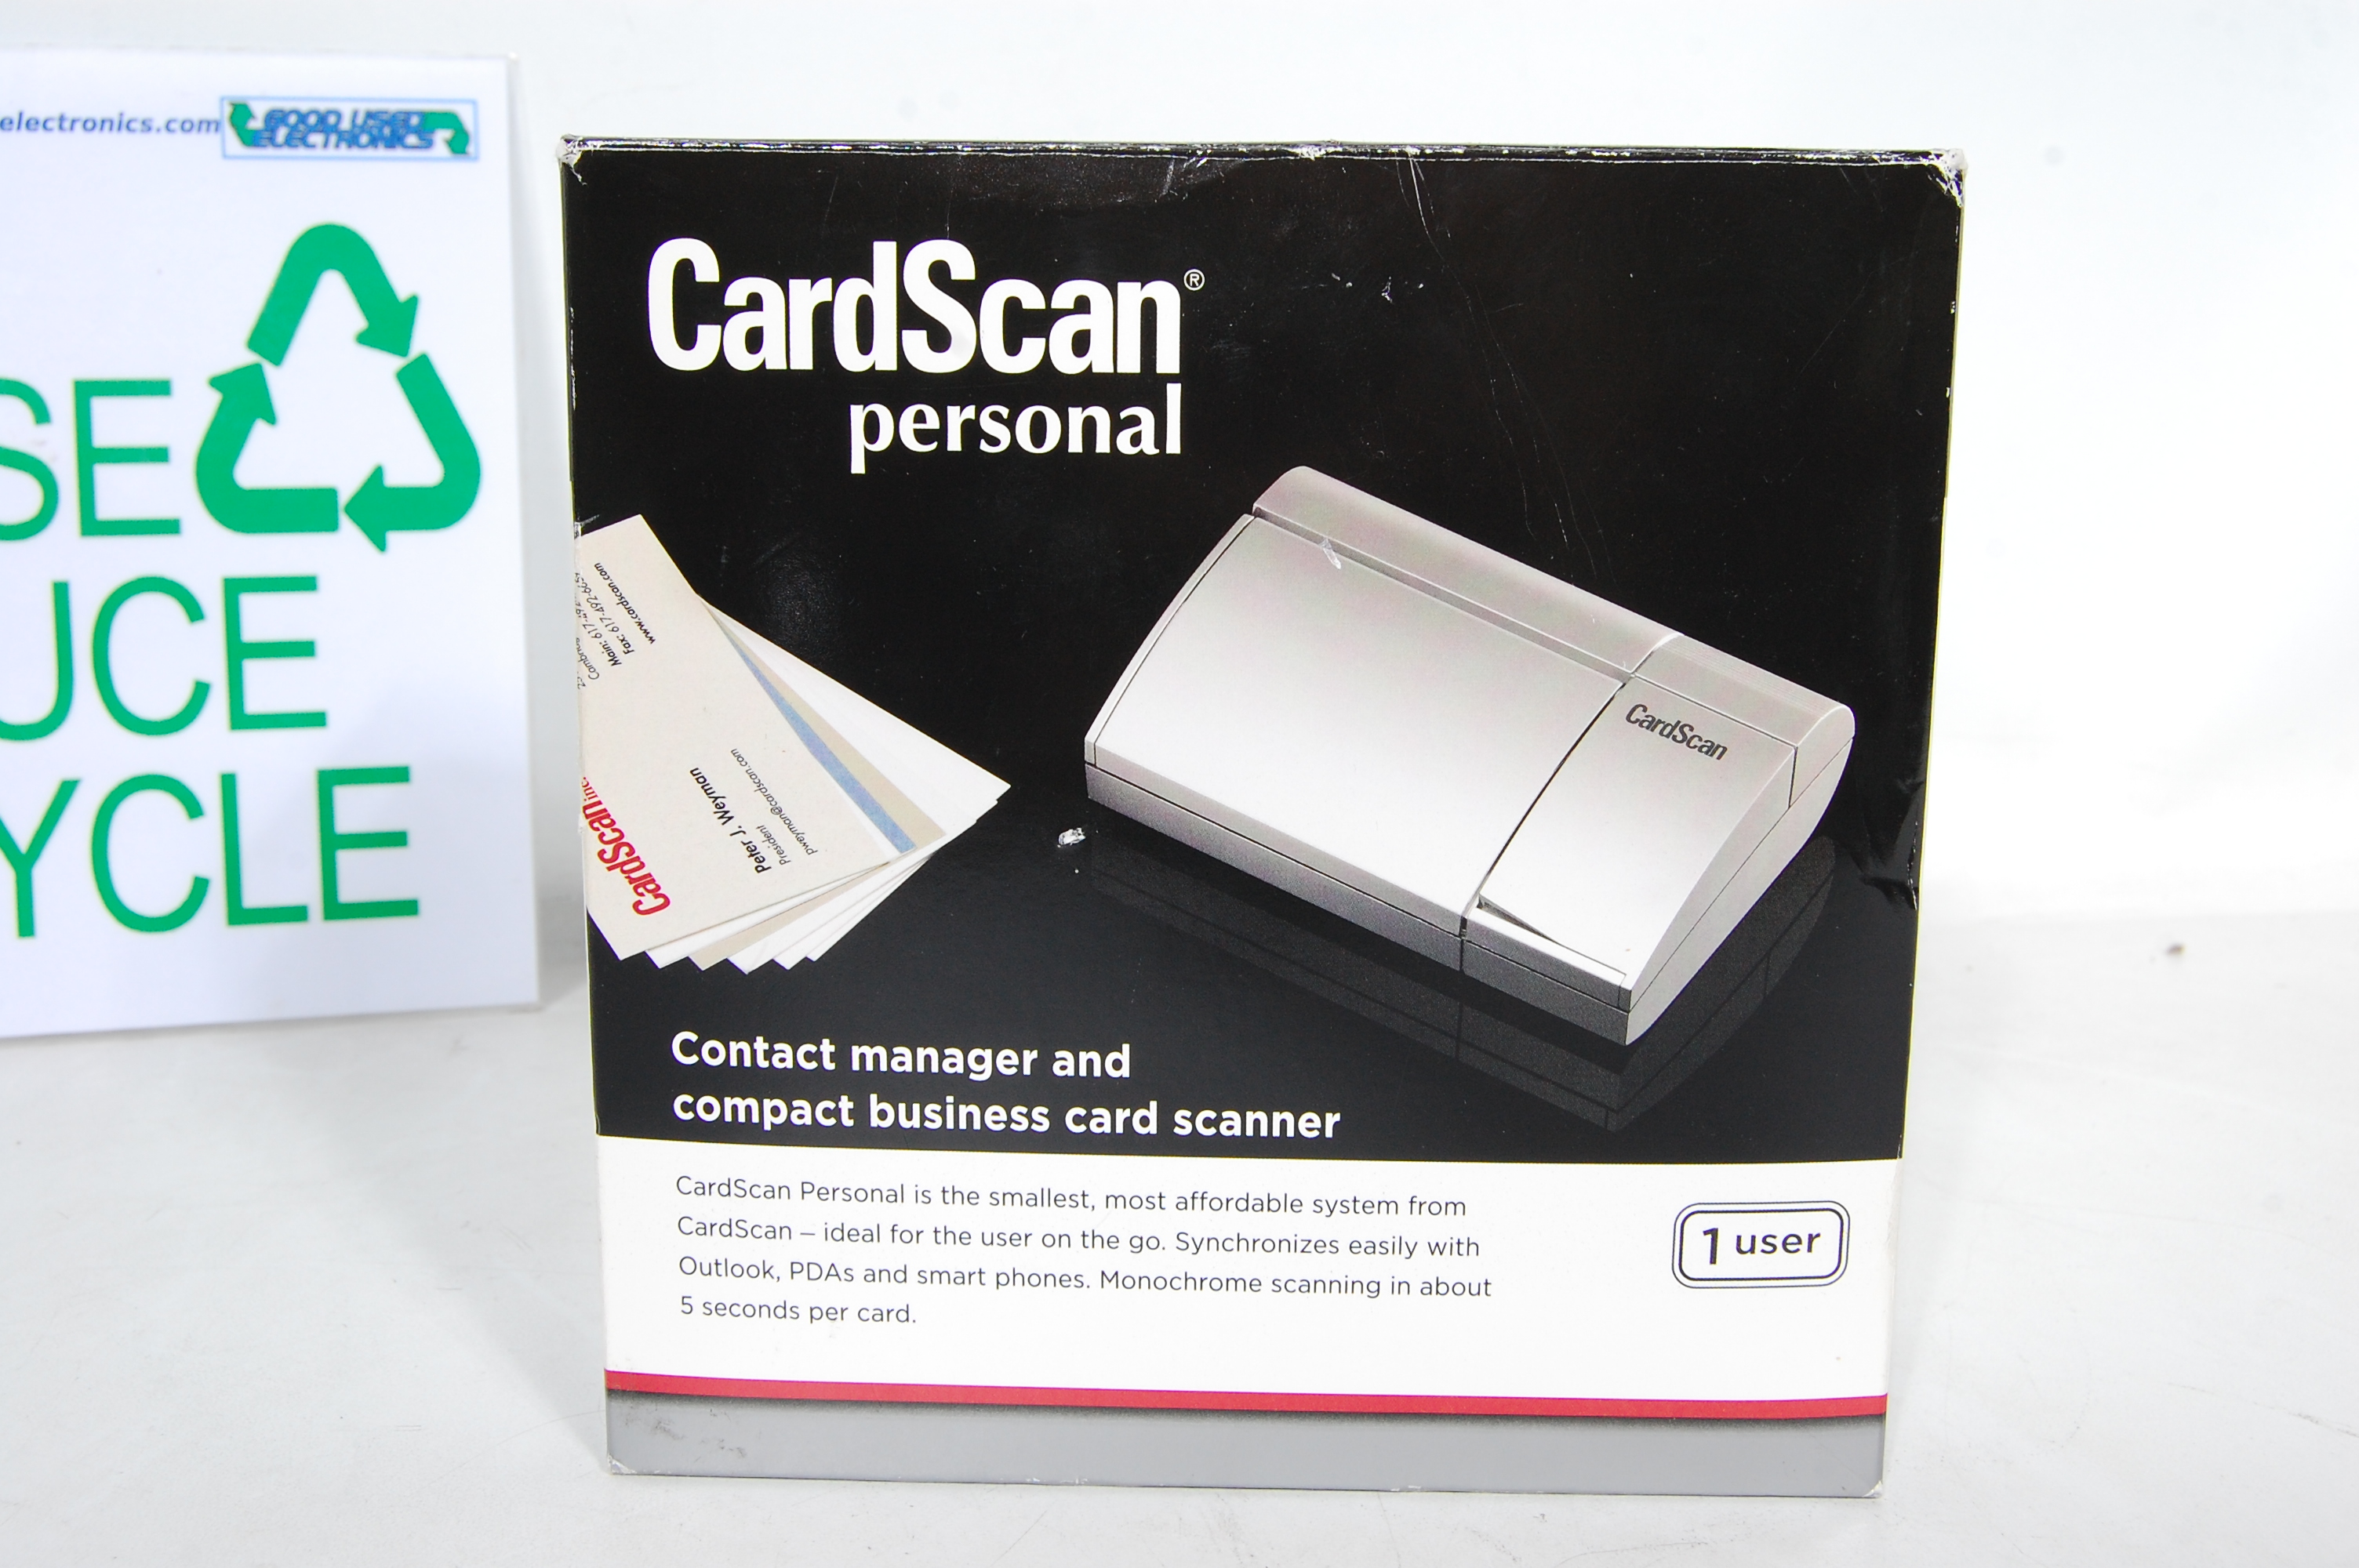 cardscan executive or team software version 8.0.5